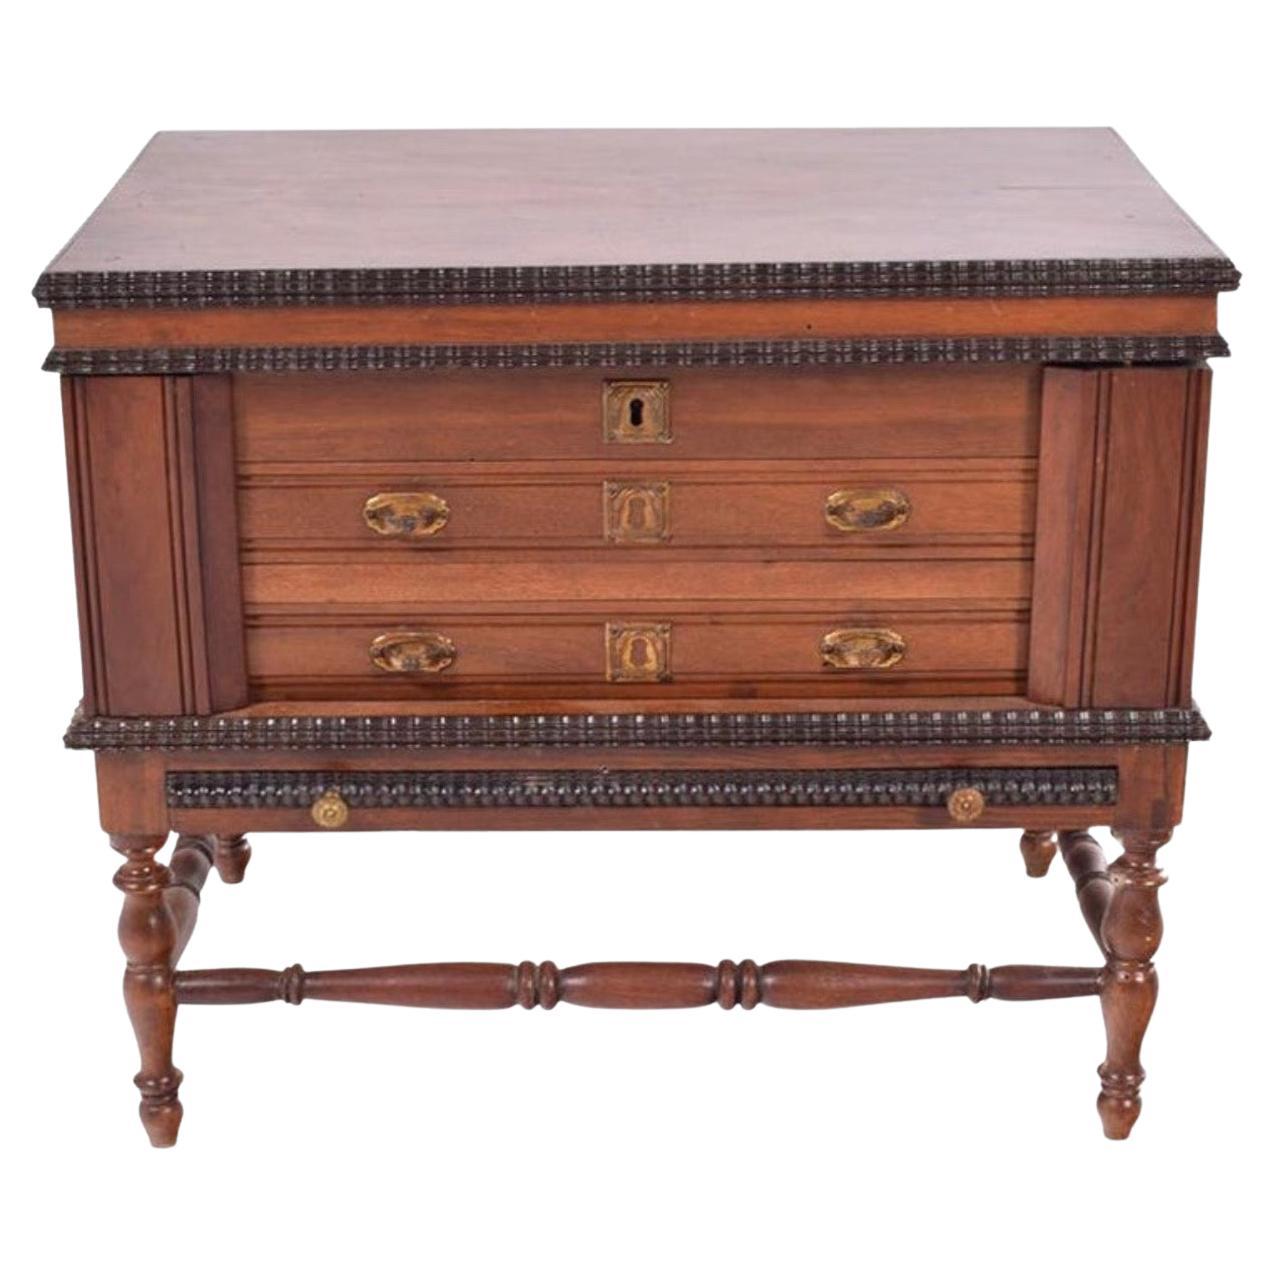 17th Century Portuguese Cutlery Chest Made in Mahogany